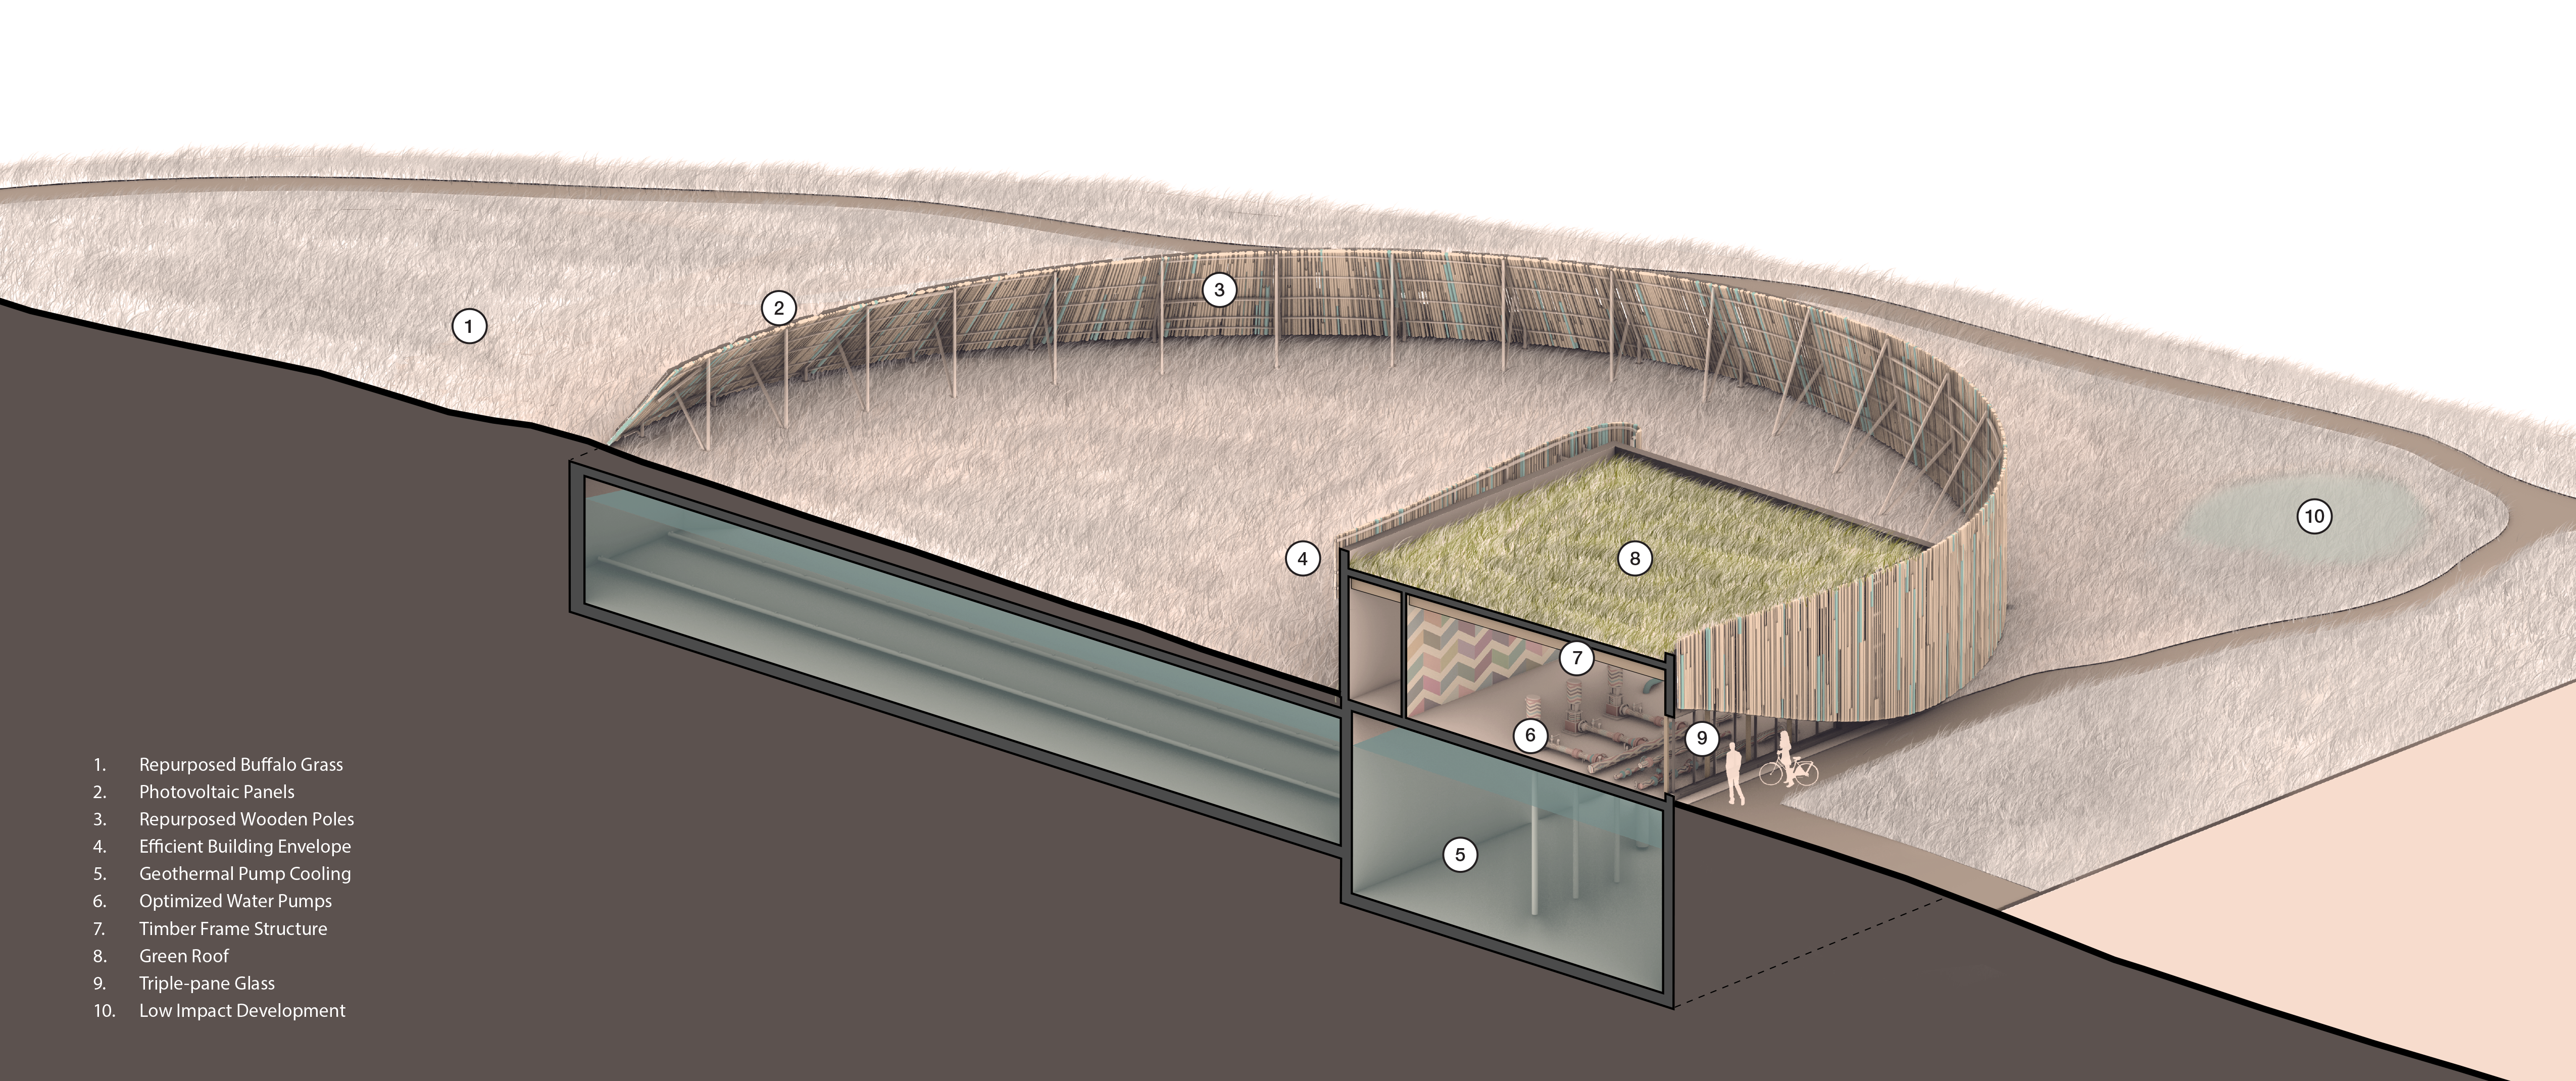 Rendering showing the sustainability components of the Taza Water Reservoir